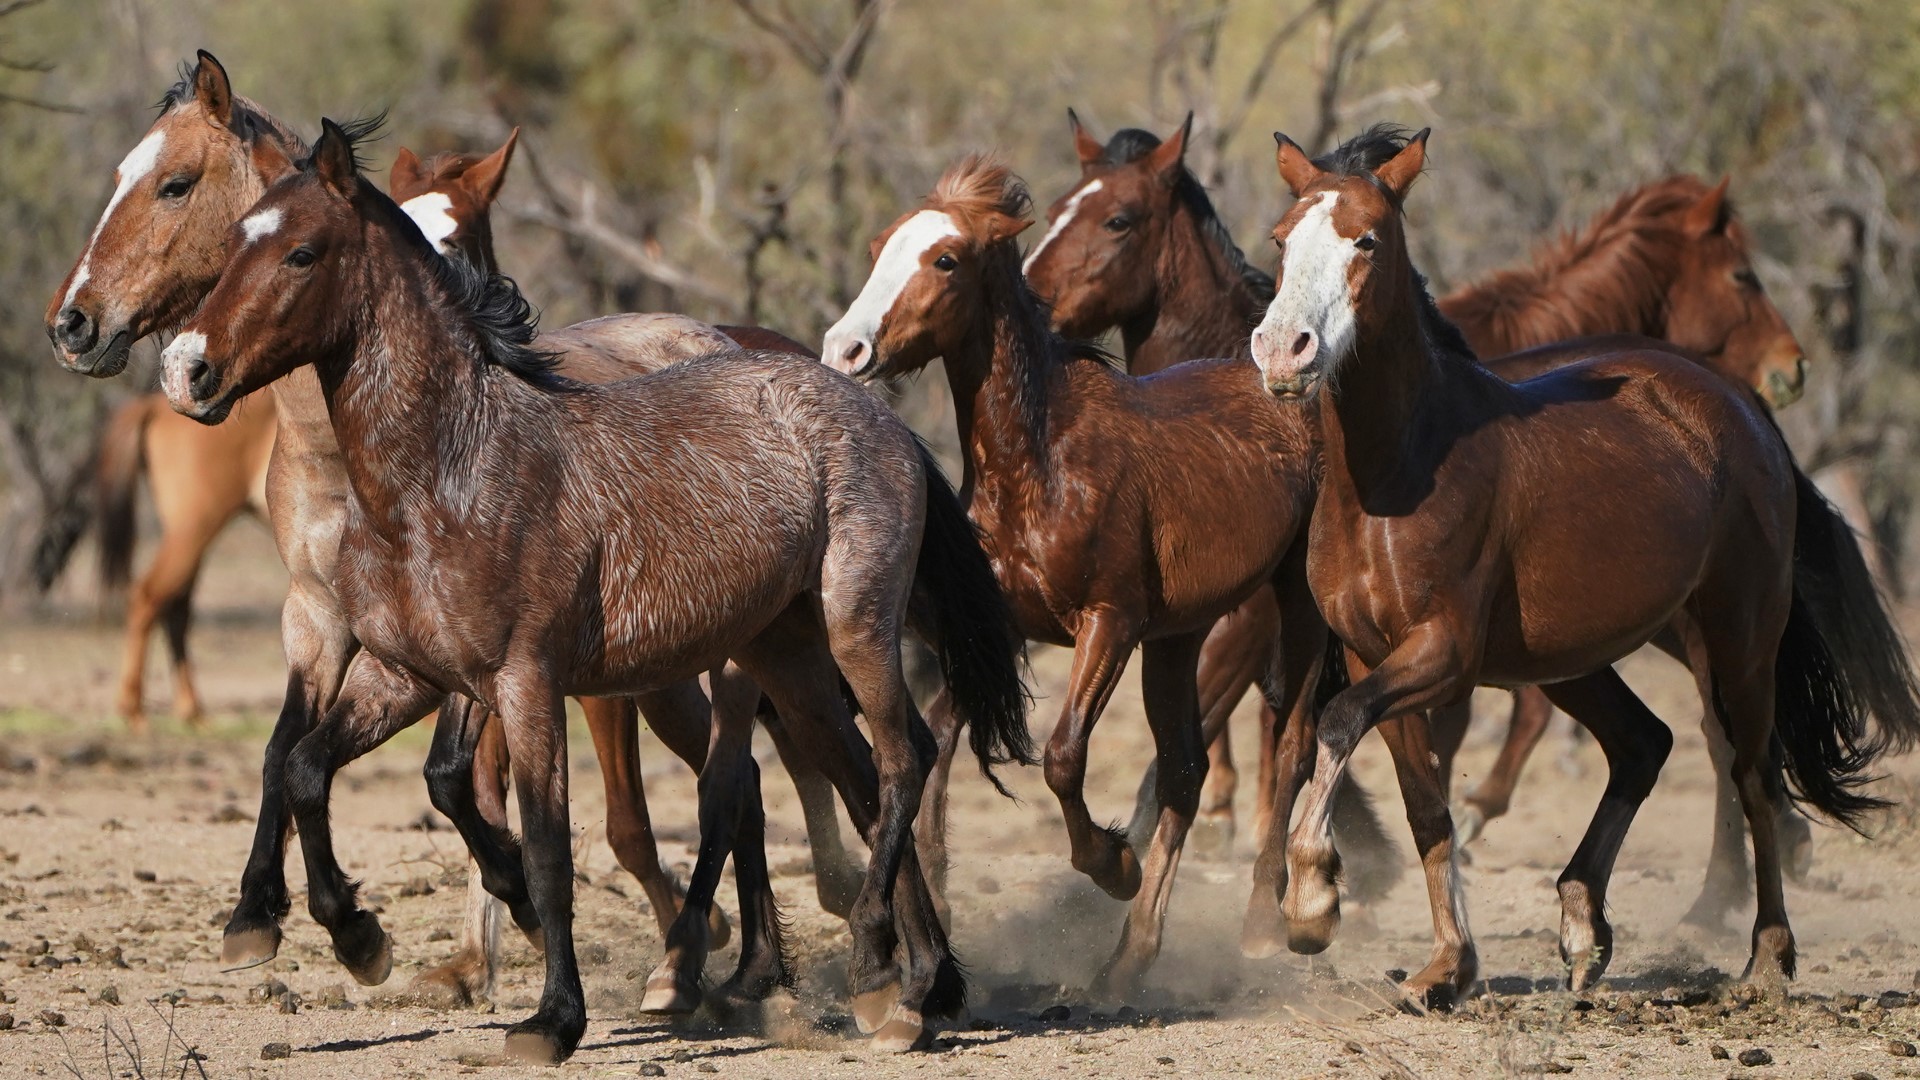 “We’re Salt River wild horses. Of course there’s a lawsuit about us.”